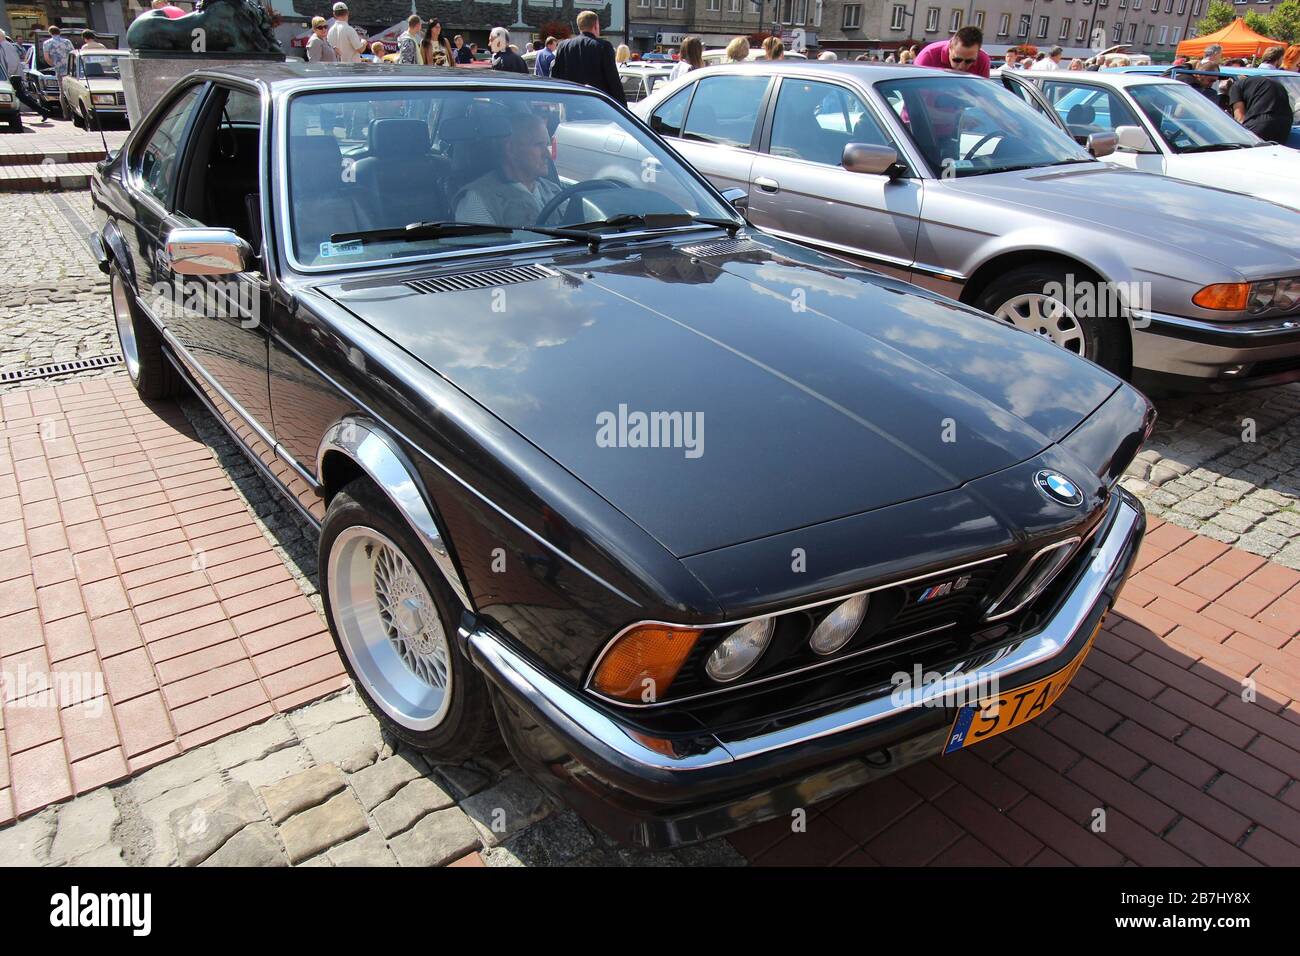 BYTOM, POLAND - SEPTEMBER 12, 2015: People walk by BMW M6 (E24) during 12th Historic Vehicle Rally in Bytom. The annual vehicle parade is one of main Stock Photo